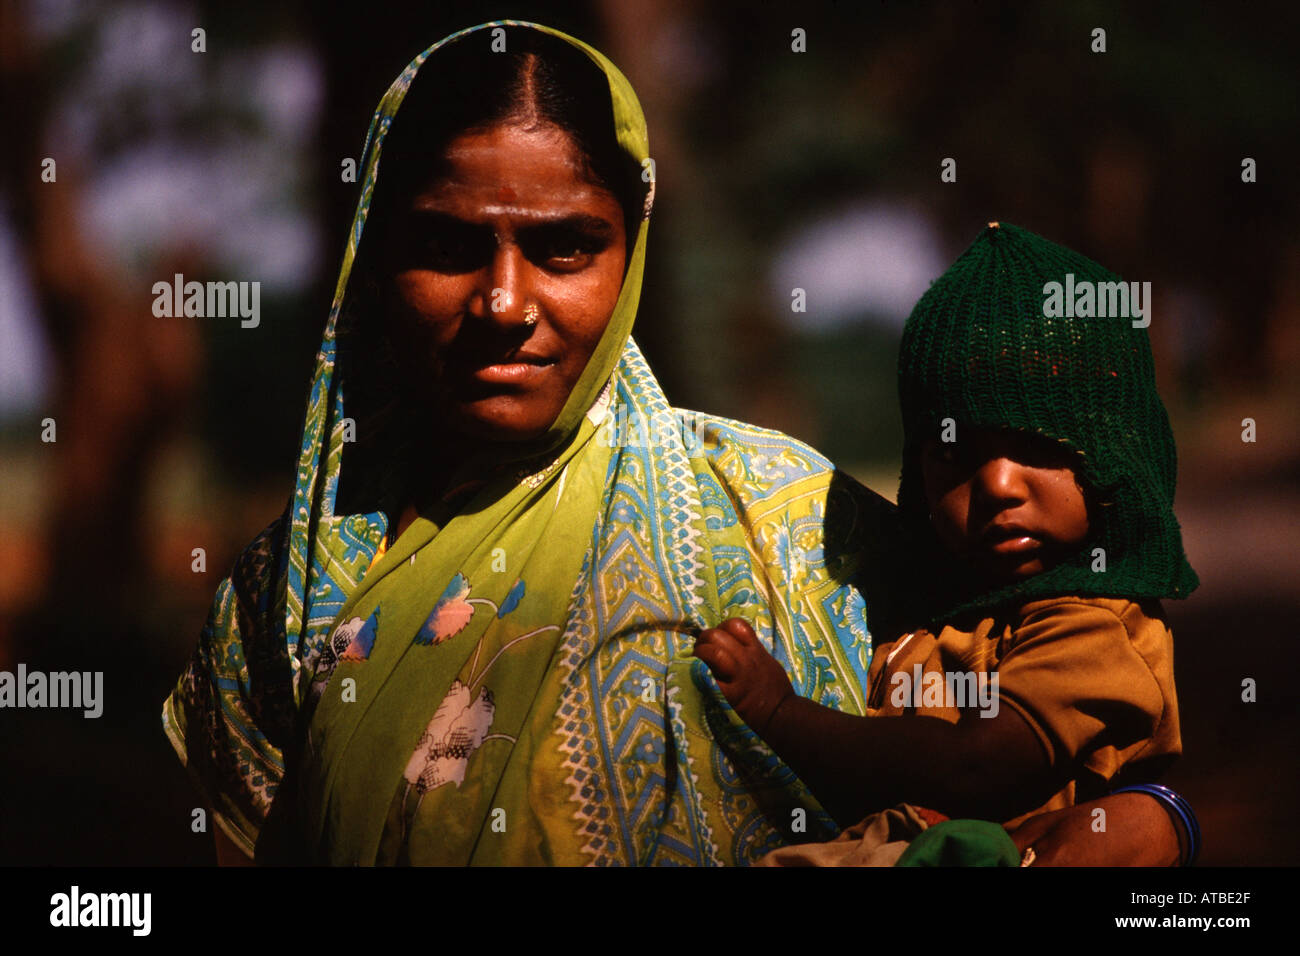 A mother and a child in Bijapur Karnataka state India Stock Photo